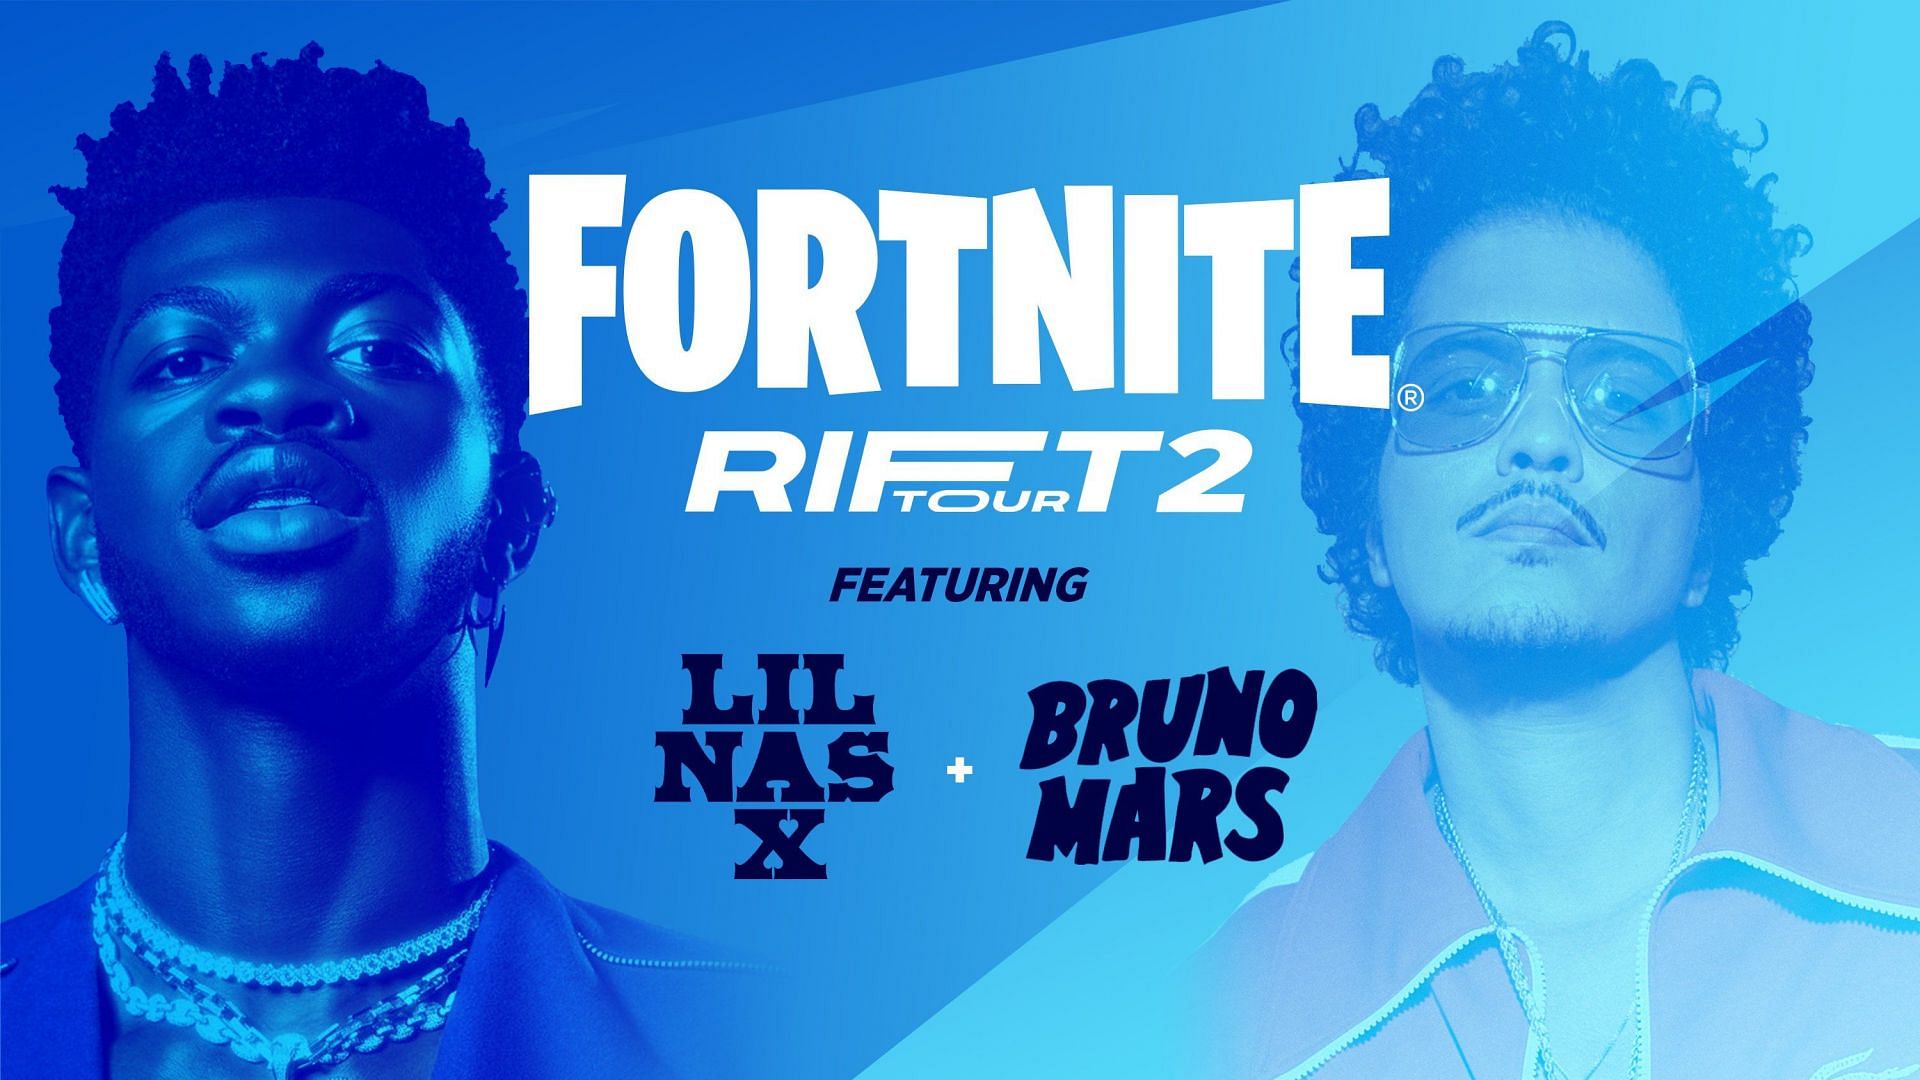 Fortnite concerts might involve Lil Nas X or Bruno Mars in the future (Image via Epic Games)